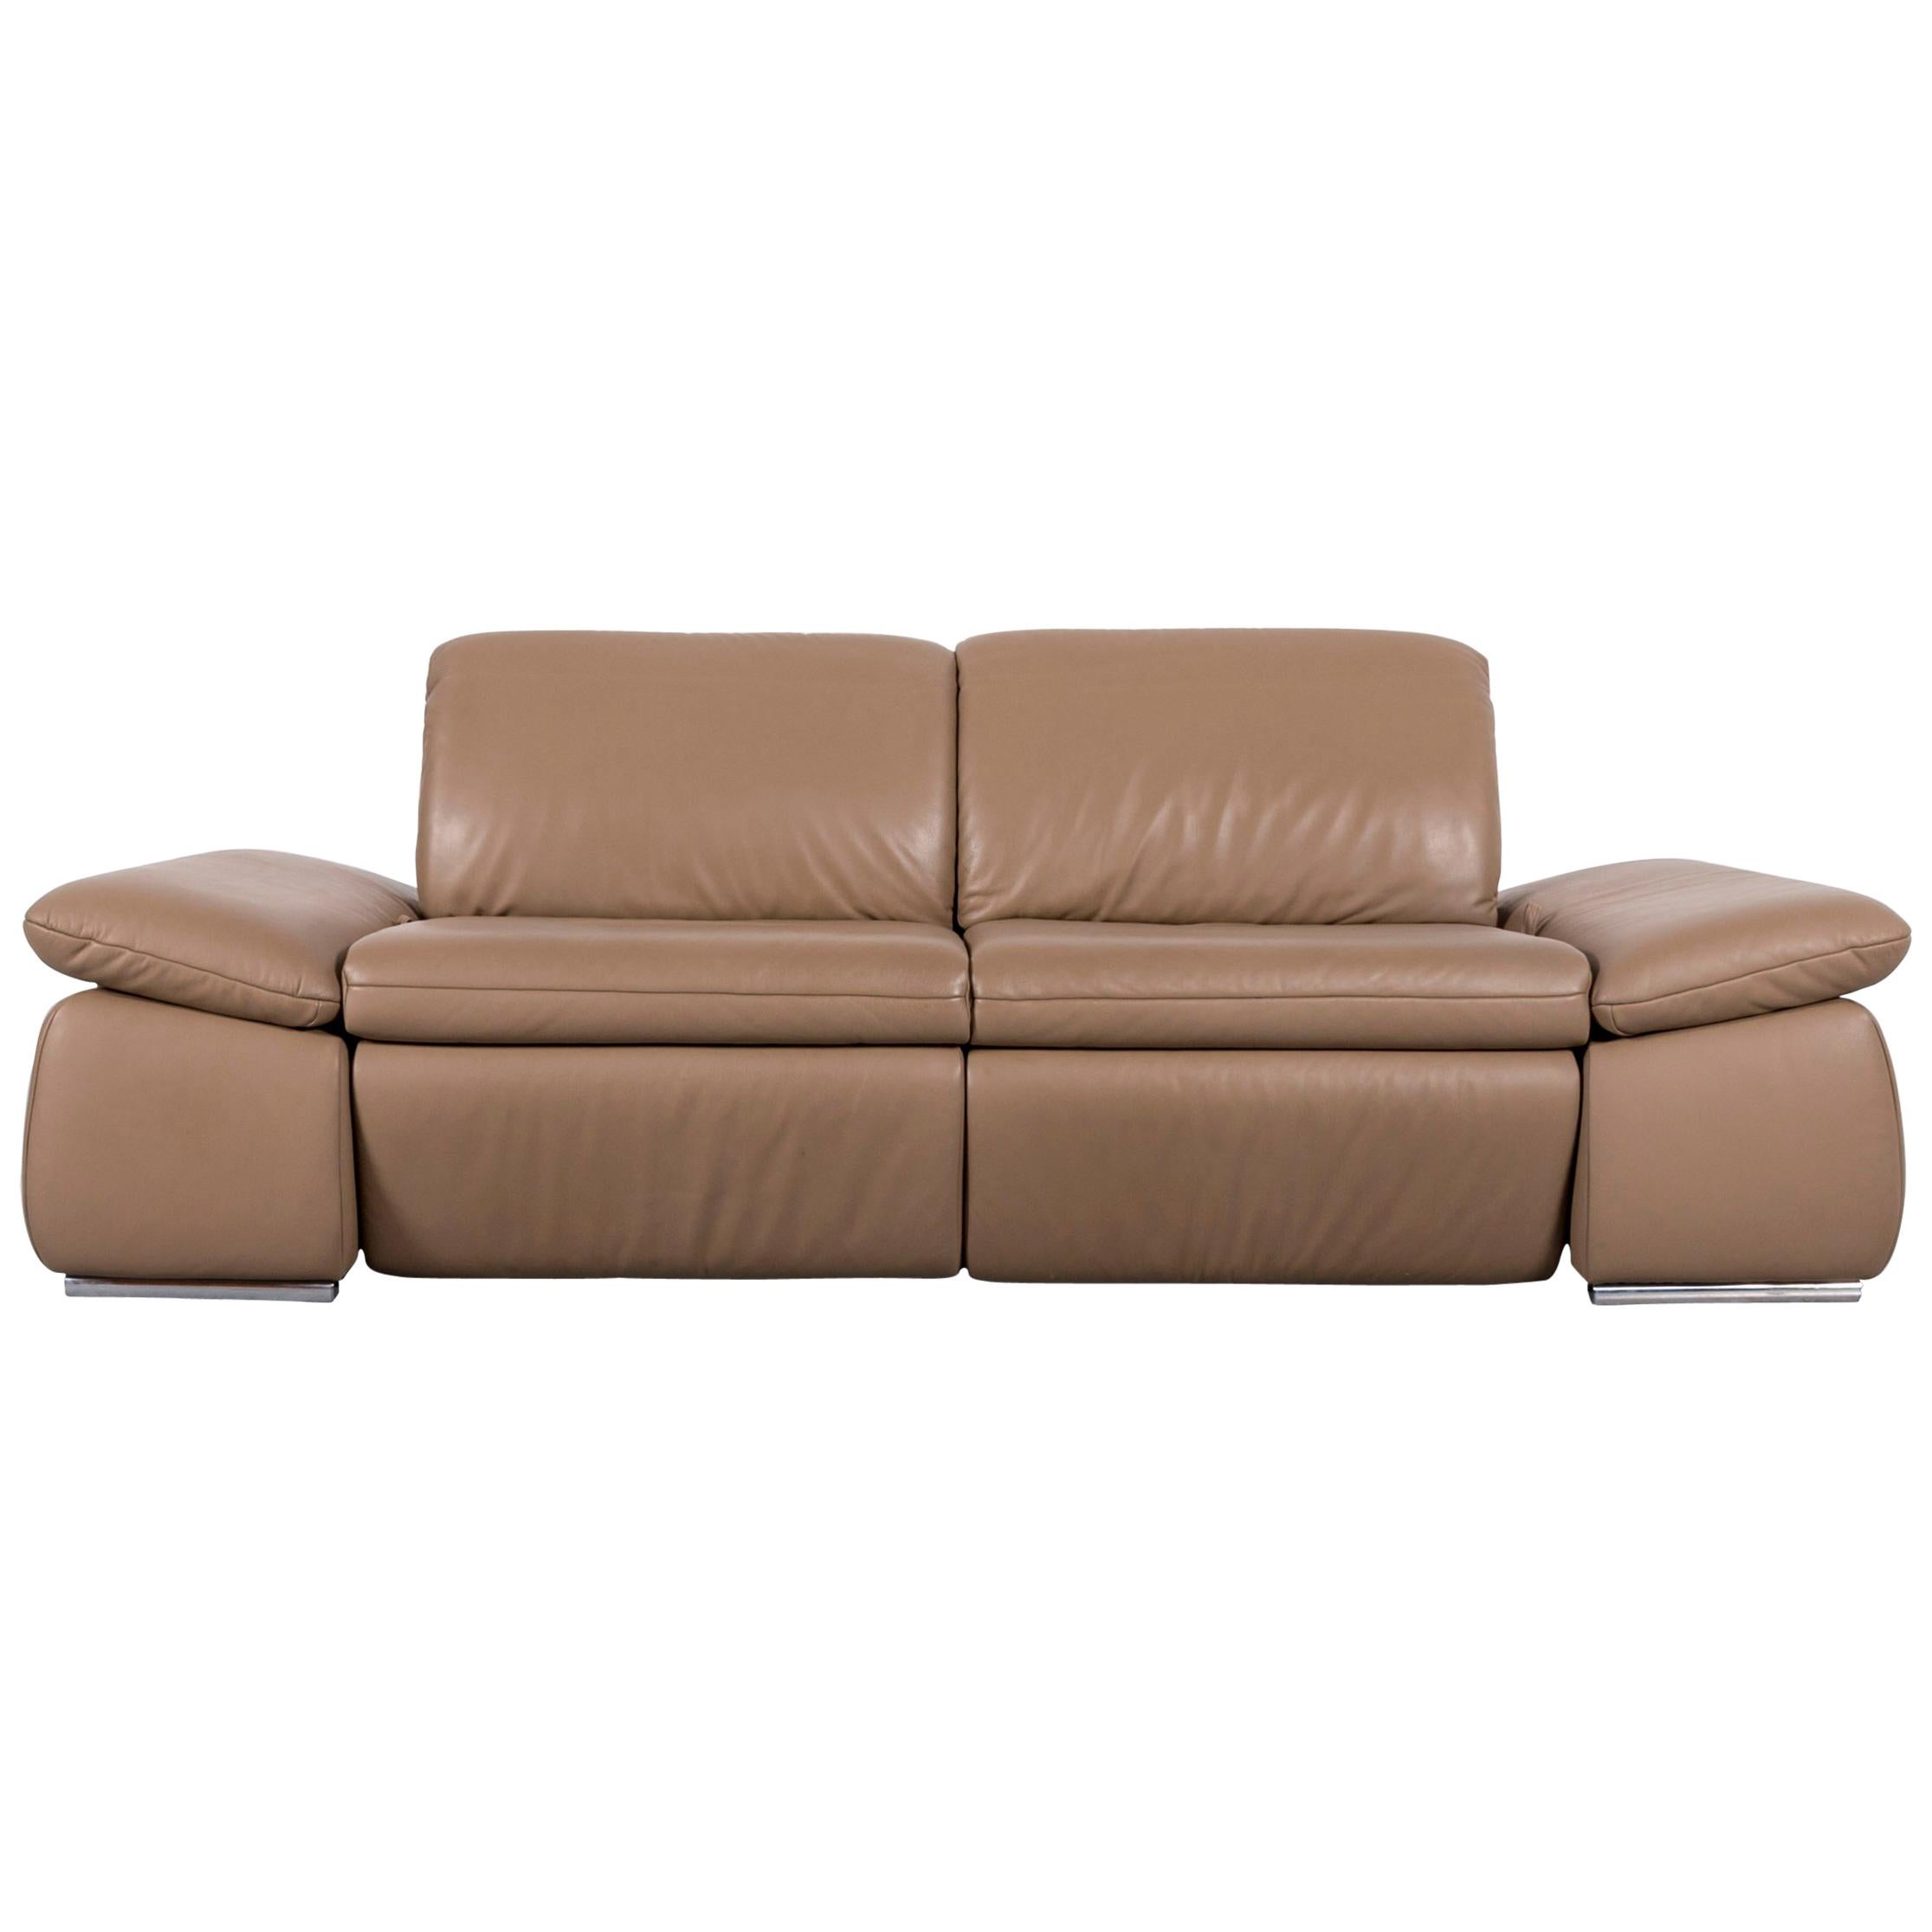 Koinor Designer Leather Sofa Brown Beige Couch Two-Seat Relax Function For Sale